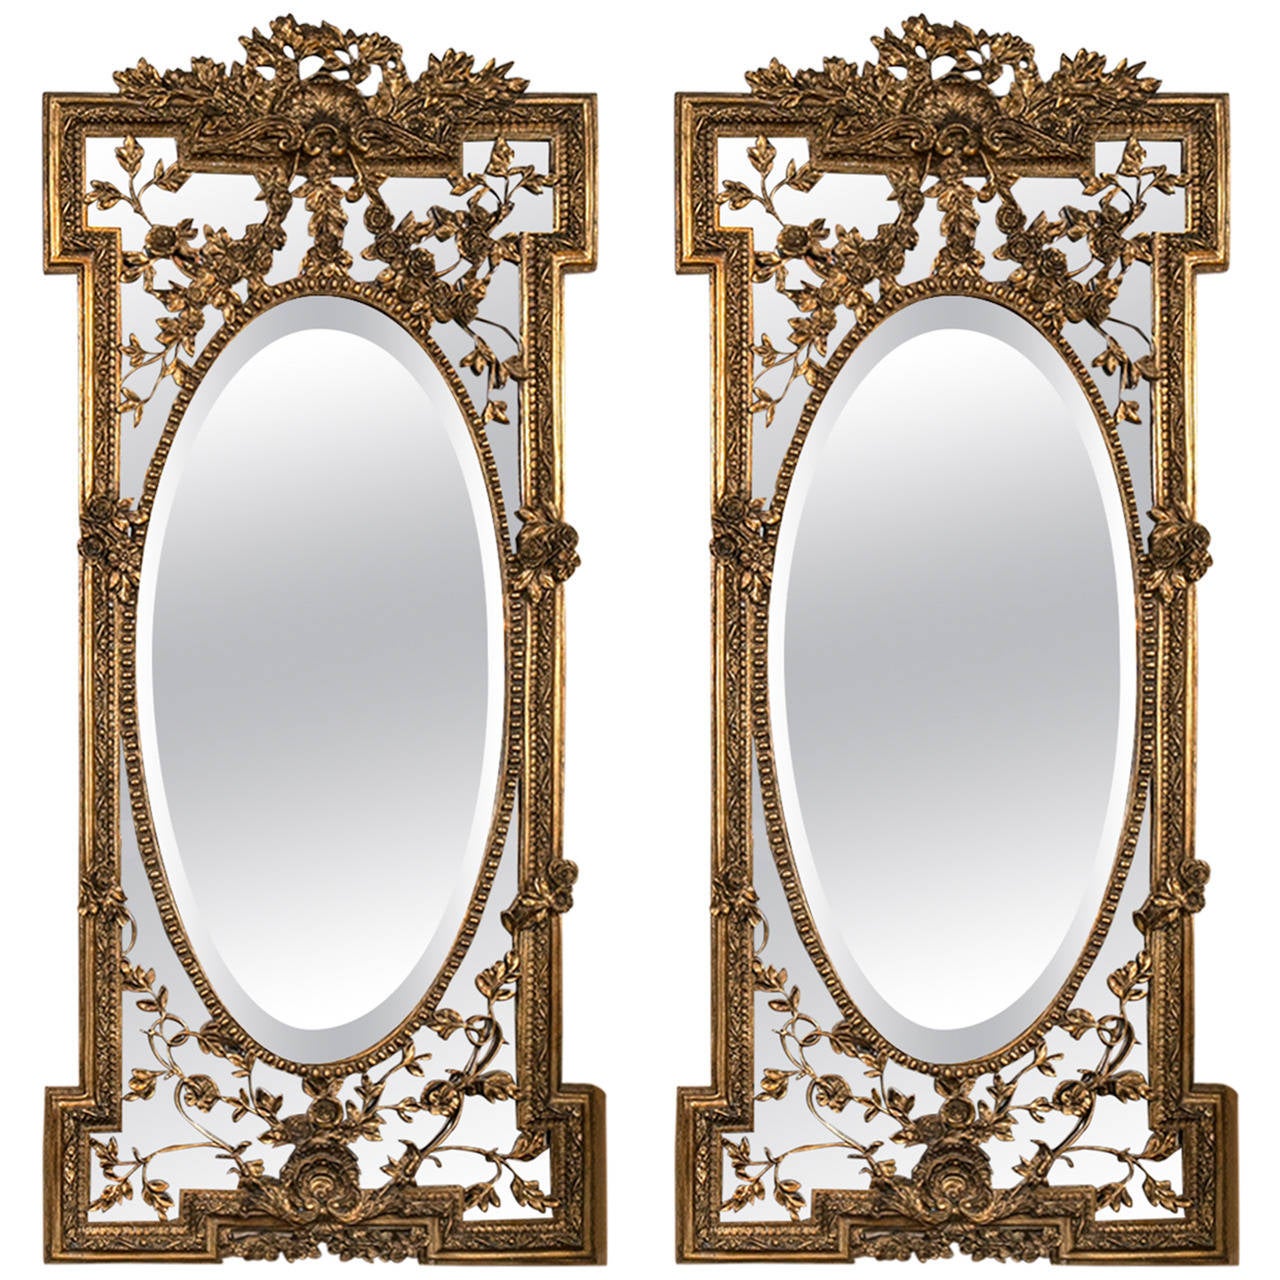 Pair of Belle Epoque Style Beveled Mirrors